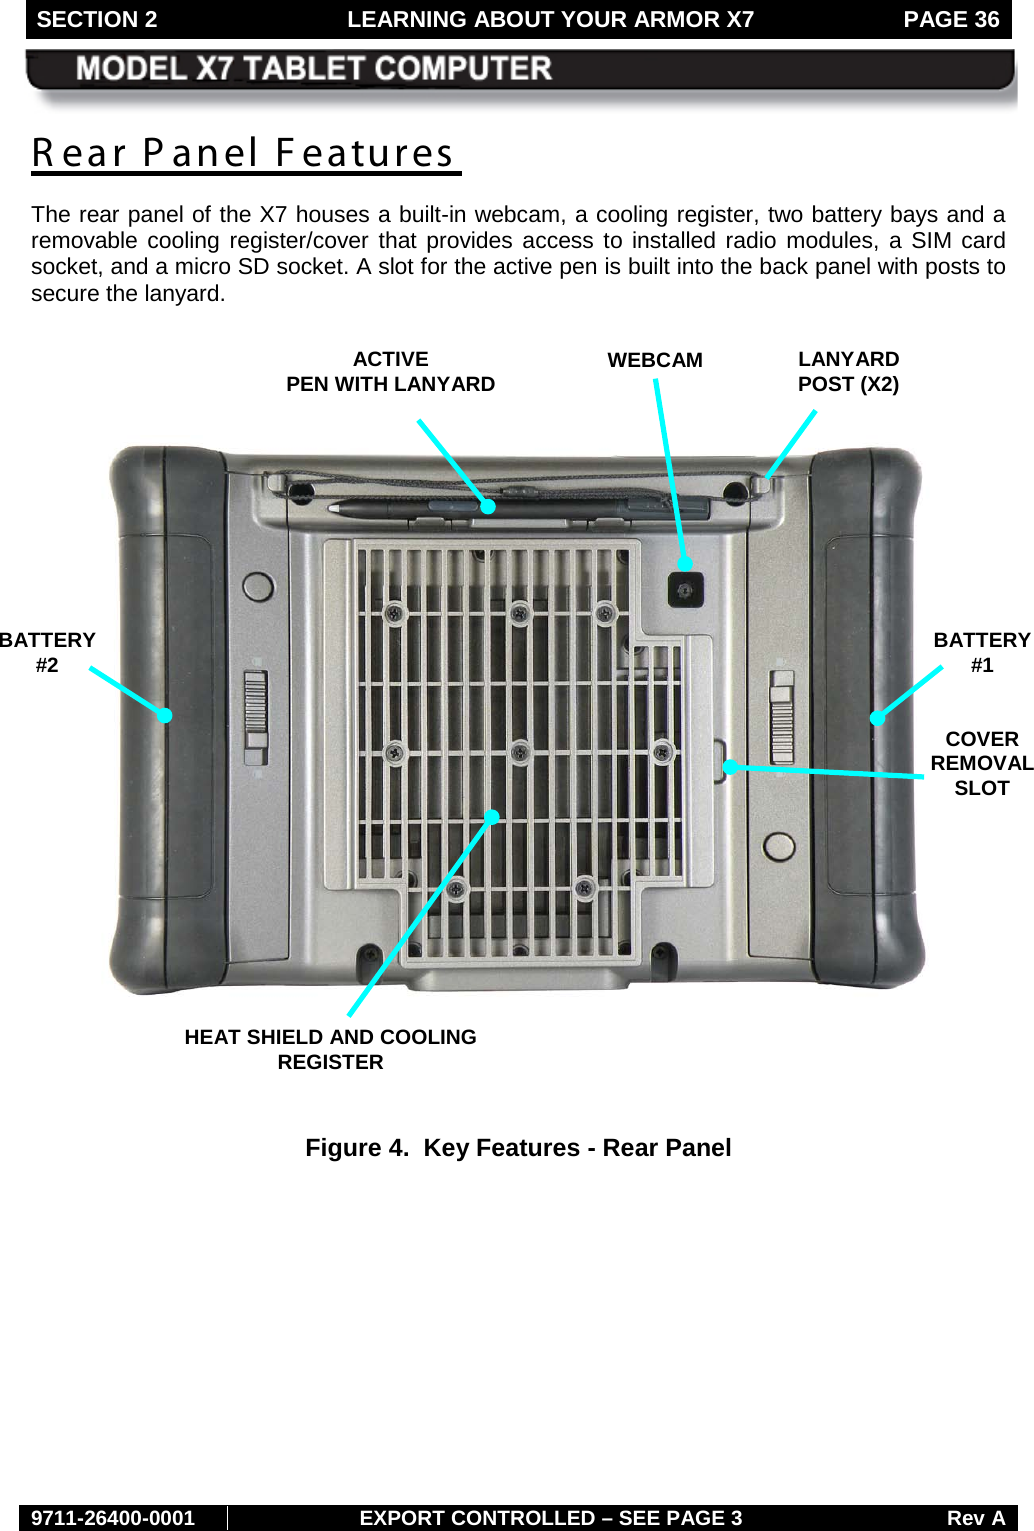 SECTION 2 LEARNING ABOUT YOUR ARMOR X7  PAGE 36        9711-26400-0001 EXPORT CONTROLLED – SEE PAGE 3 Rev A R ear Panel Features The rear panel of the X7 houses a built-in webcam, a cooling register, two battery bays and a removable cooling register/cover that provides access to installed radio modules, a SIM card socket, and a micro SD socket. A slot for the active pen is built into the back panel with posts to secure the lanyard.        Figure 4.  Key Features - Rear Panel   HEAT SHIELD AND COOLING REGISTER BATTERY  #2 BATTERY  #1 WEBCAM ACTIVE PEN WITH LANYARD LANYARD POST (X2) COVER  REMOVAL  SLOT 